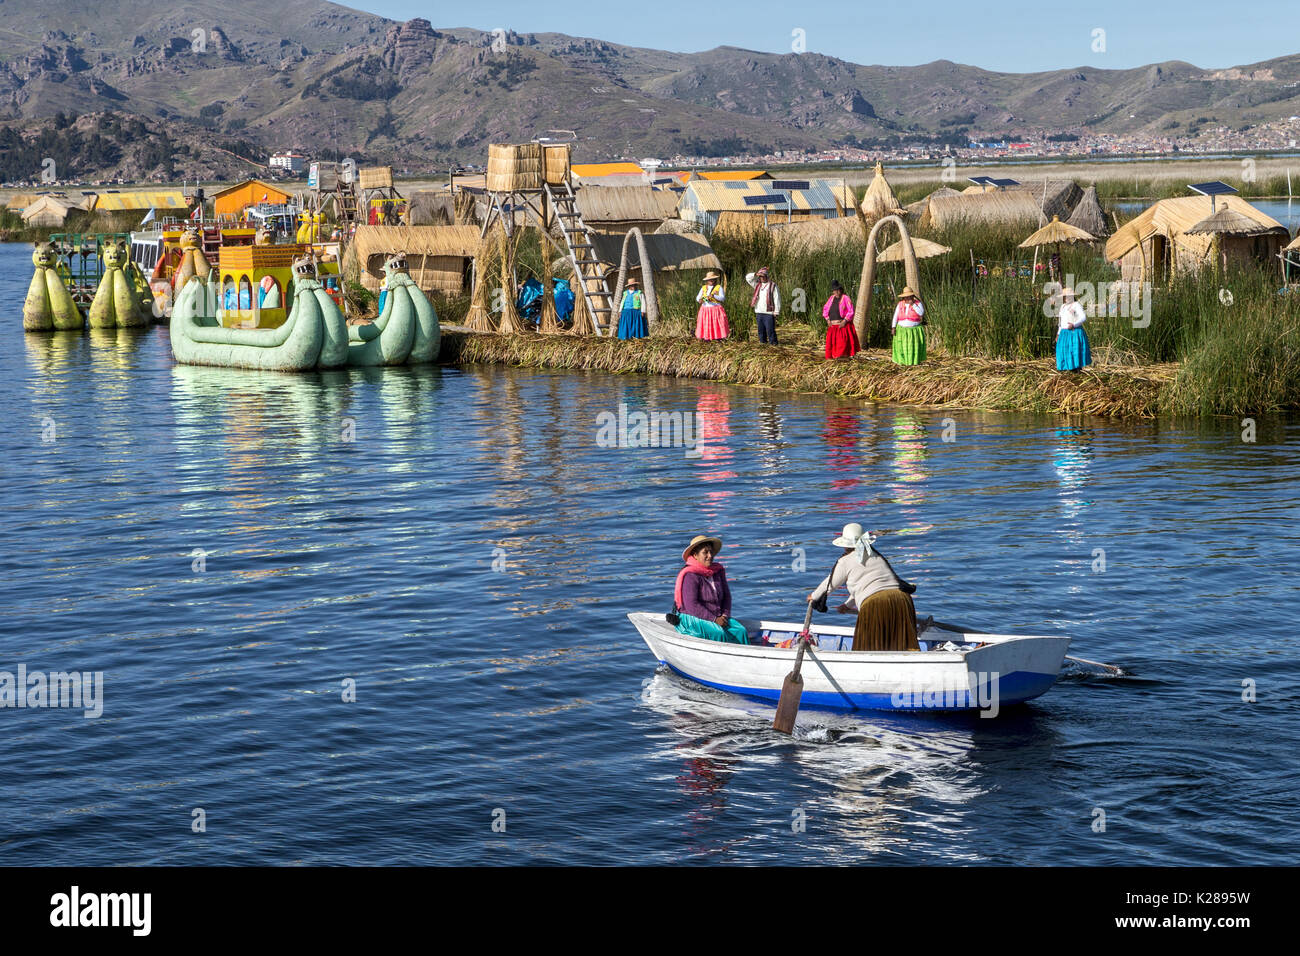 Uros floating Island made from totora reed with Puno in background Lake Titicaca Peru Stock Photo